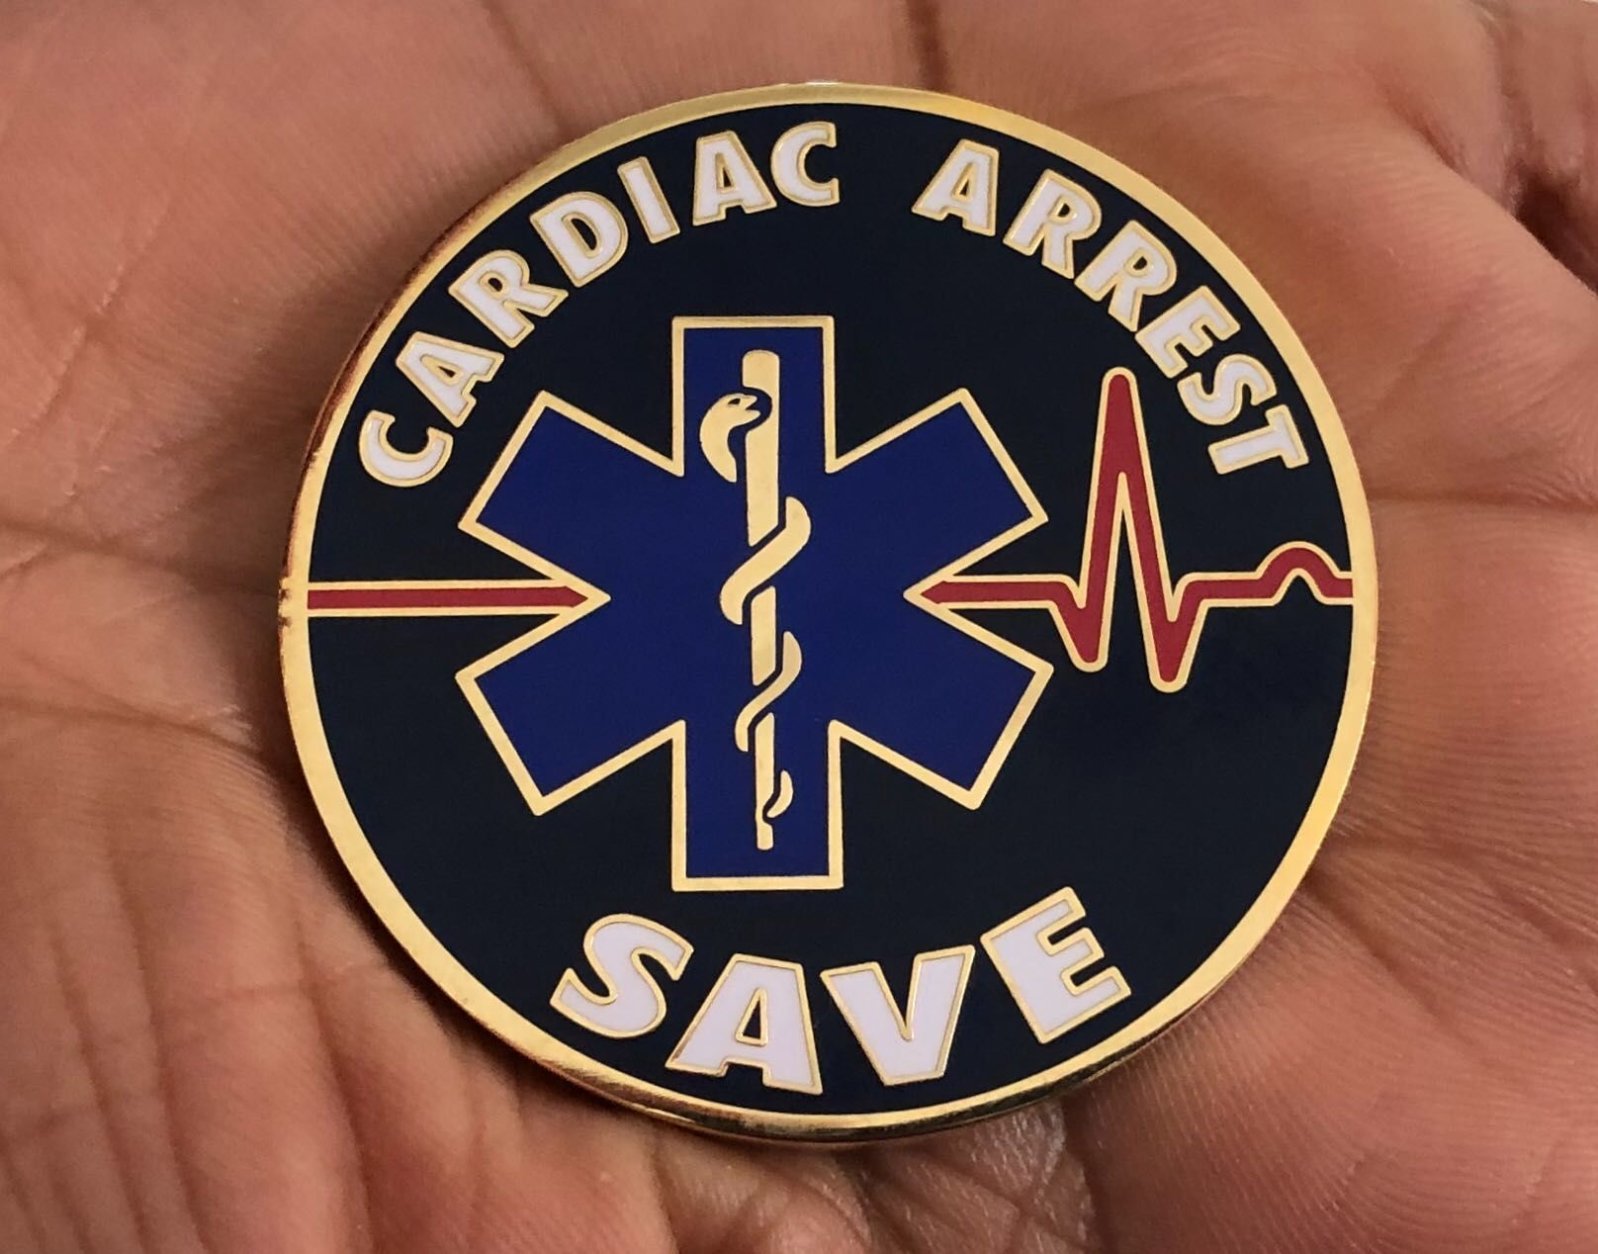 DC Fire and EMS Cardiac Arrest Save Coin. (WTOP/Kristi King)